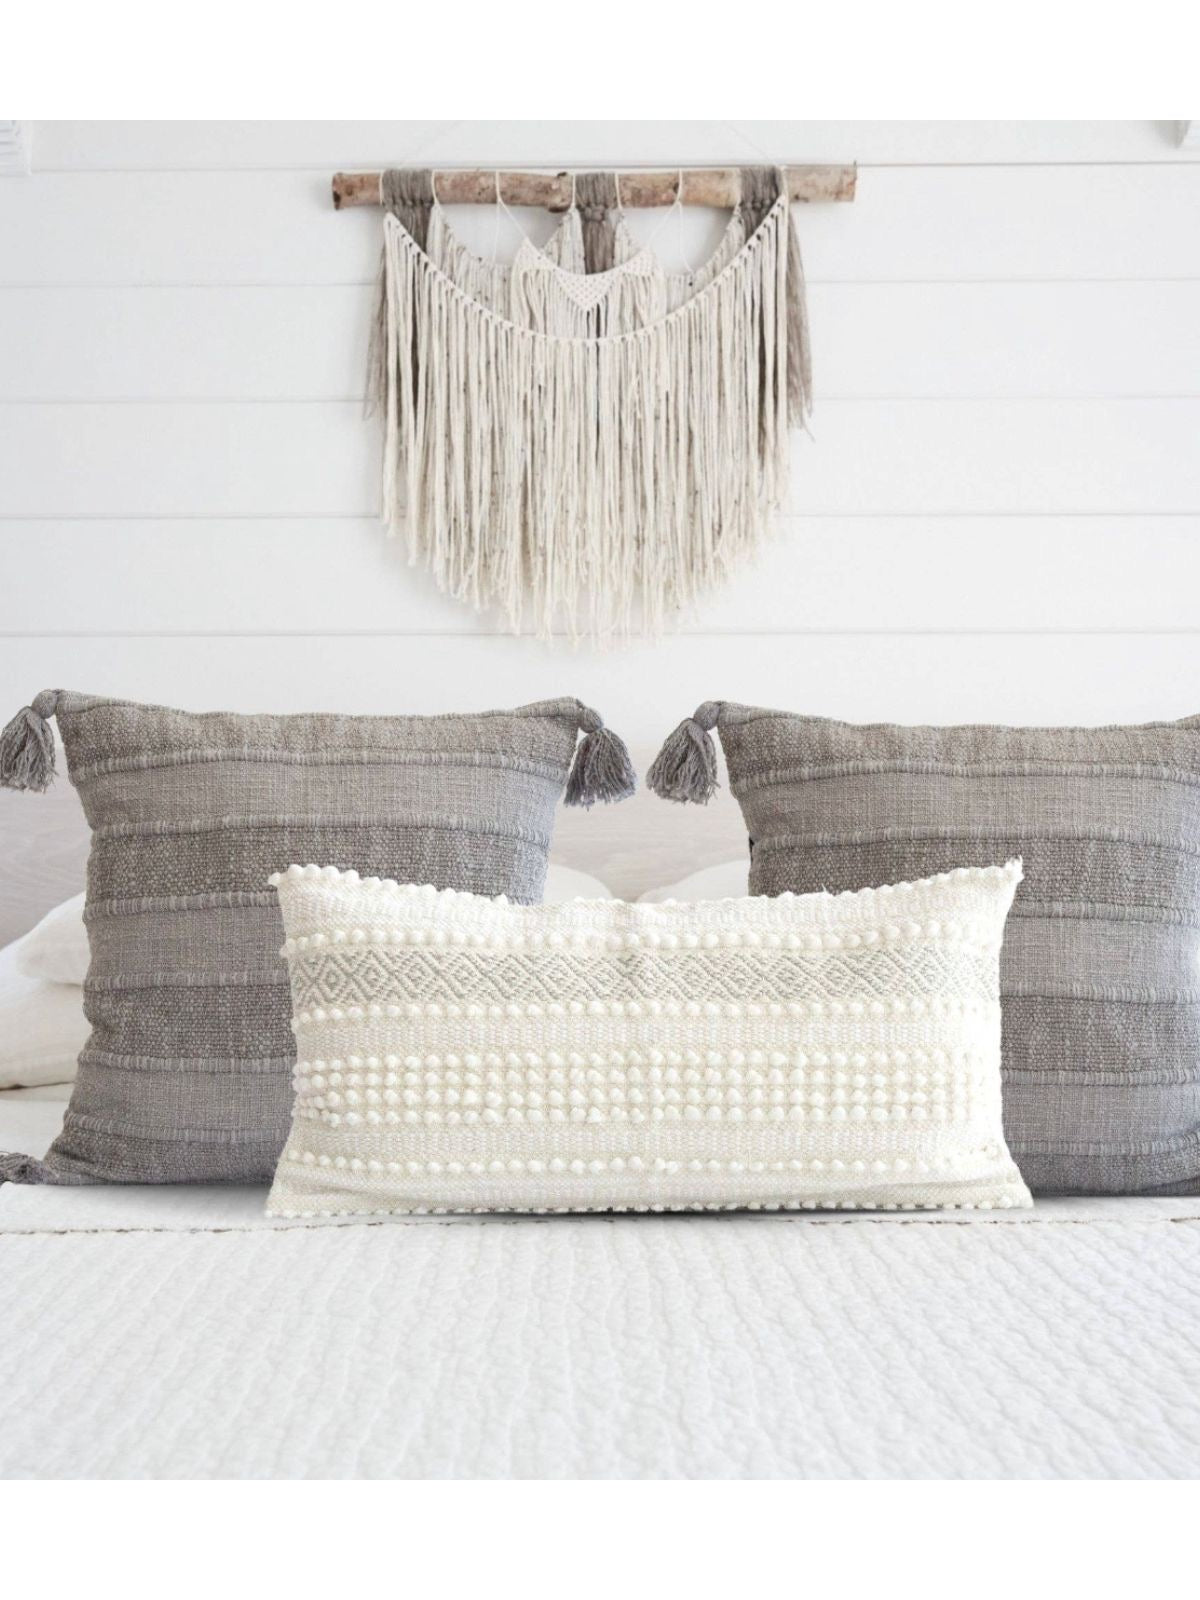 This 100% Cotton Wide Striped Pillow Cover with pom pom tassels measures 18x18 has a soft linen texture that will add a boho yet modern touch to any space. Available in 2 colors, Sold by KYA Home Decor    